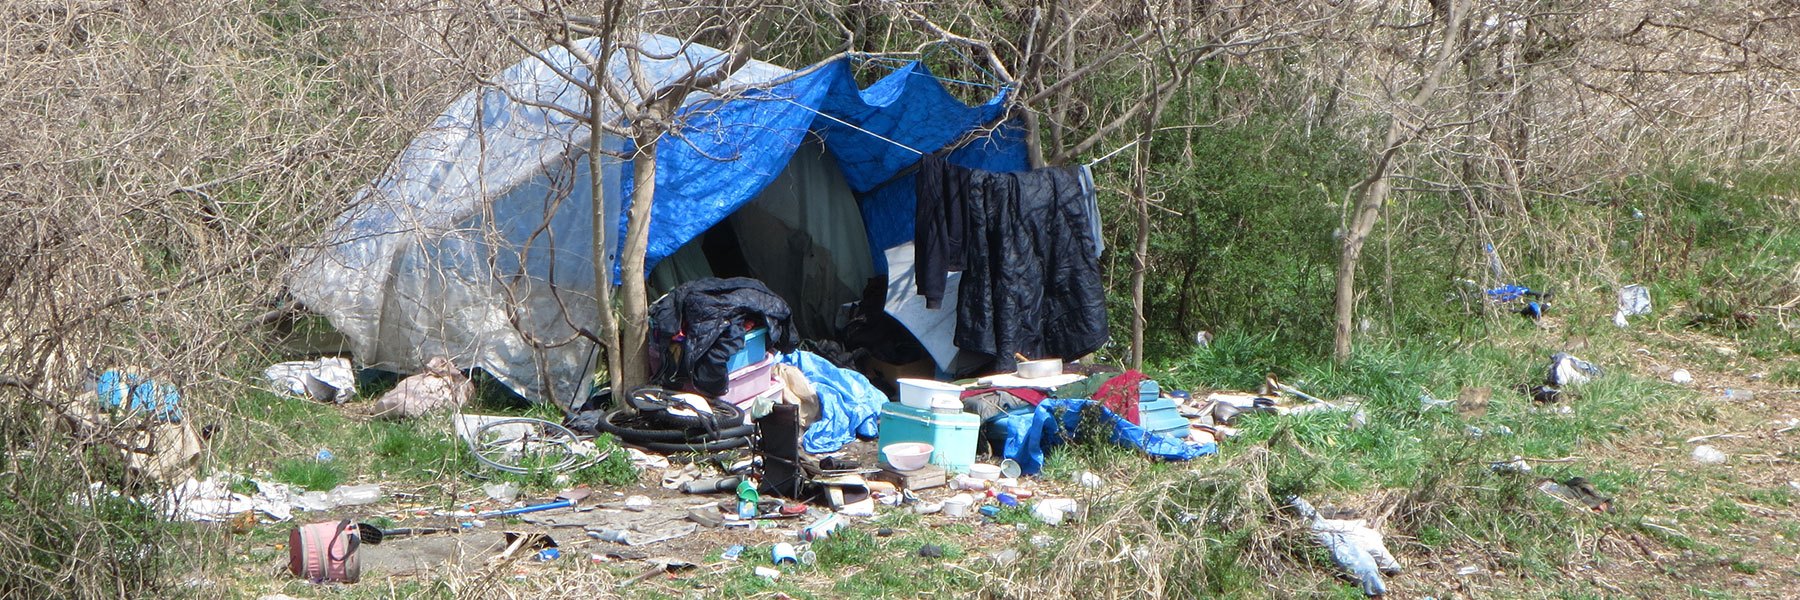 A tent with items strewn around it